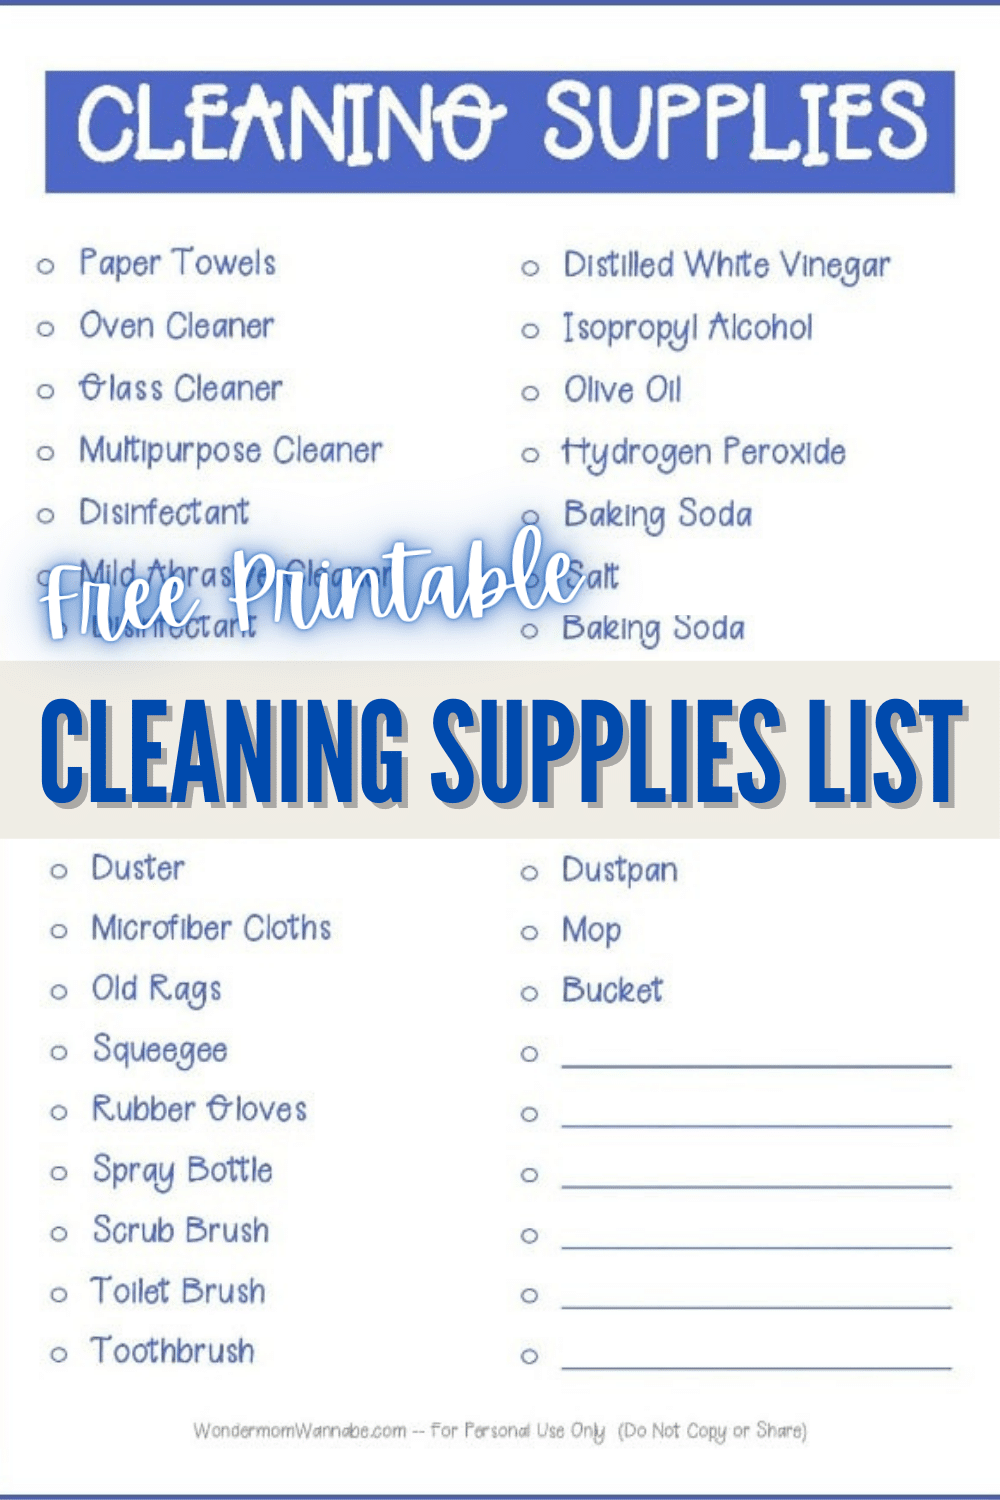 This Free Printable Cleaning Supplies List makes it easier for you to keep everything you need for cleaning on hand and readily available. #cleaning #cleaningsupplies #printable via @wondermomwannab